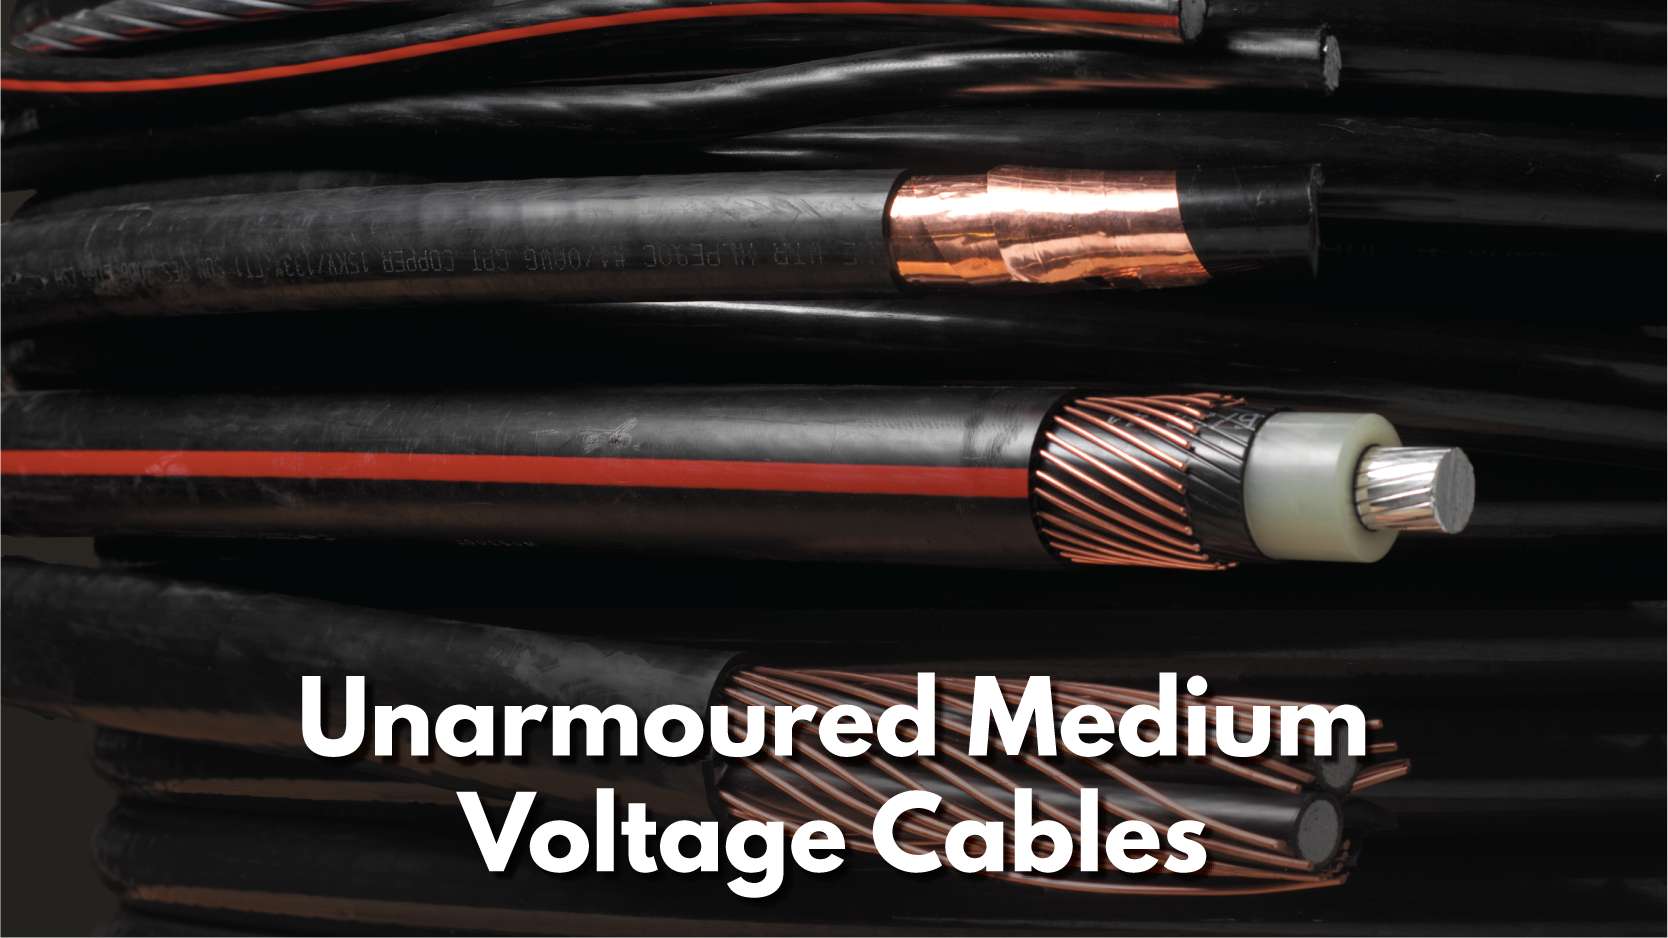 Texcan - View All Products - Unarmoured Medium Voltage Cables